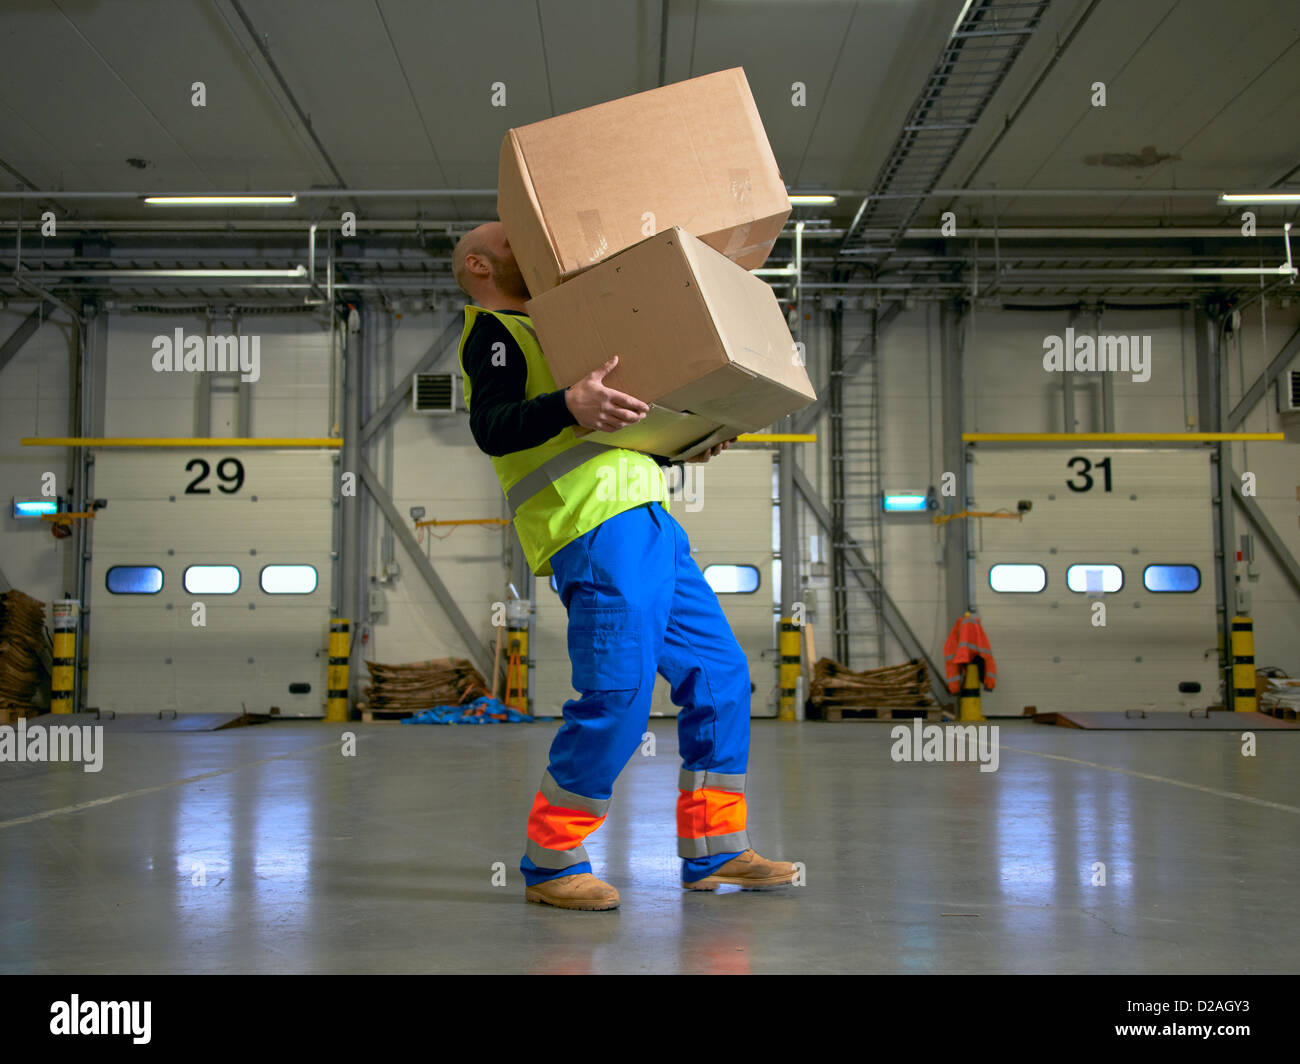 Worker carrying boxes in warehouse Banque D'Images